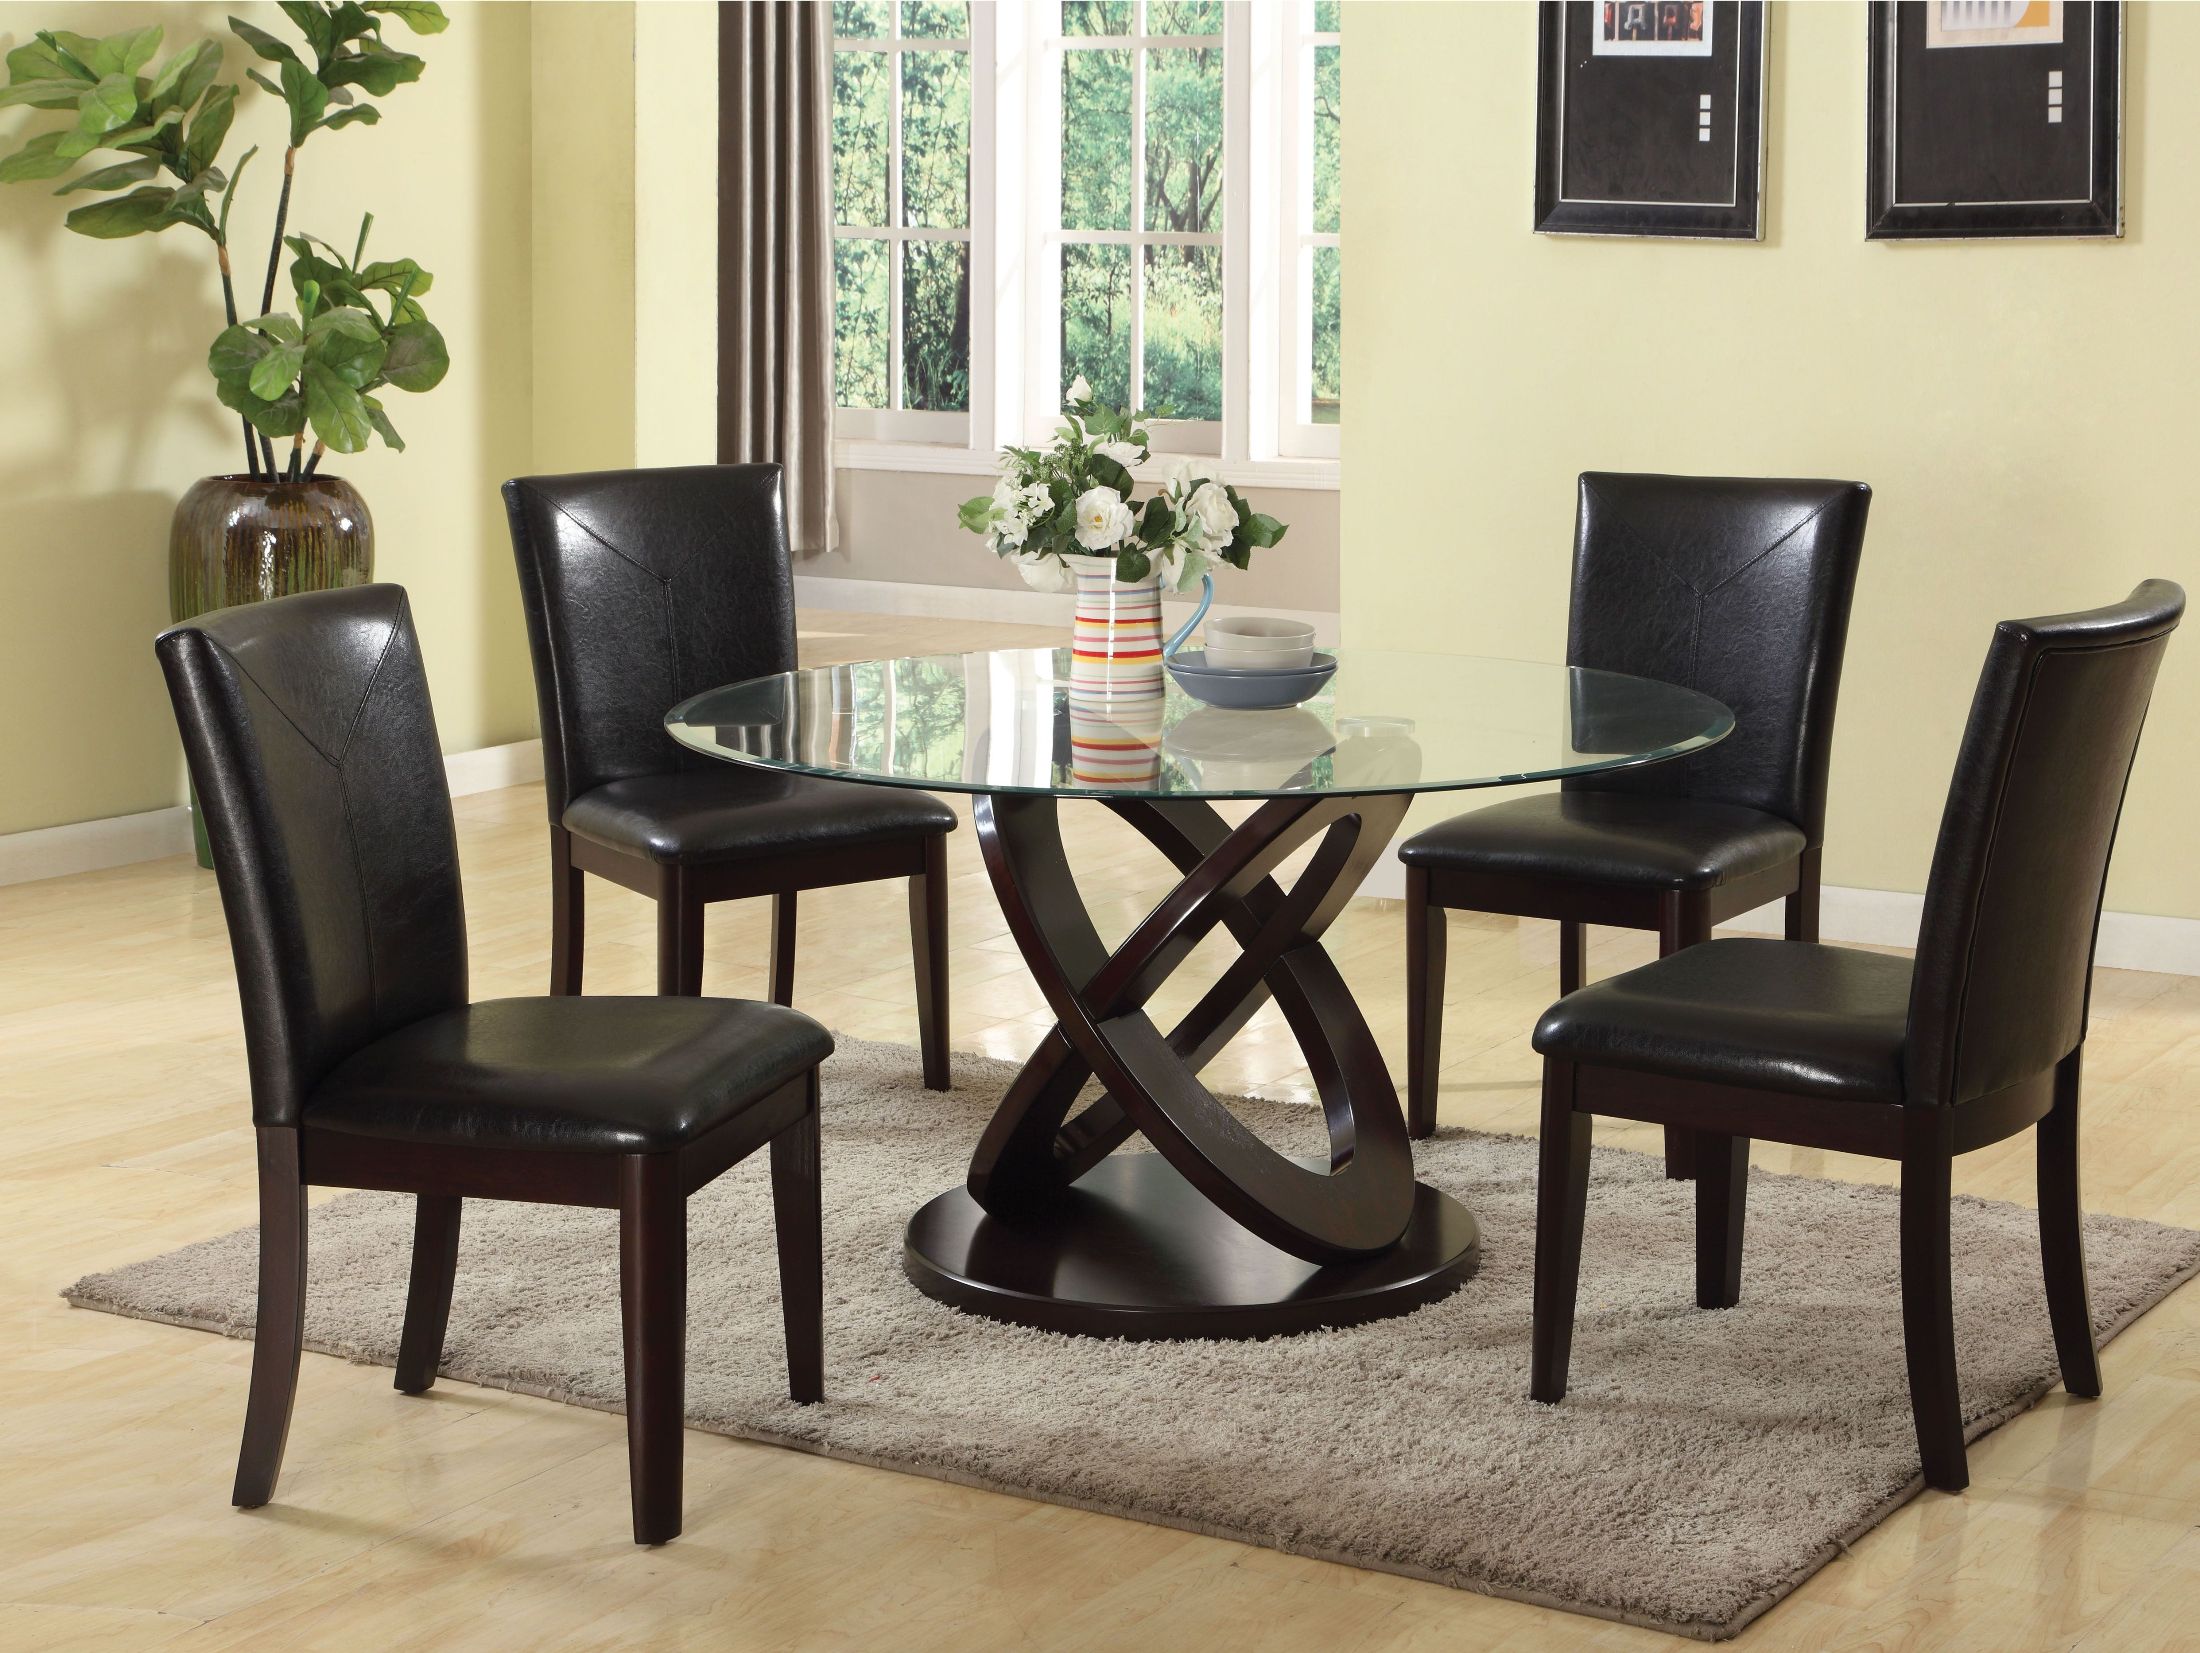 ACME Gable Espresso And Clear Glass Dining Room Set Gable